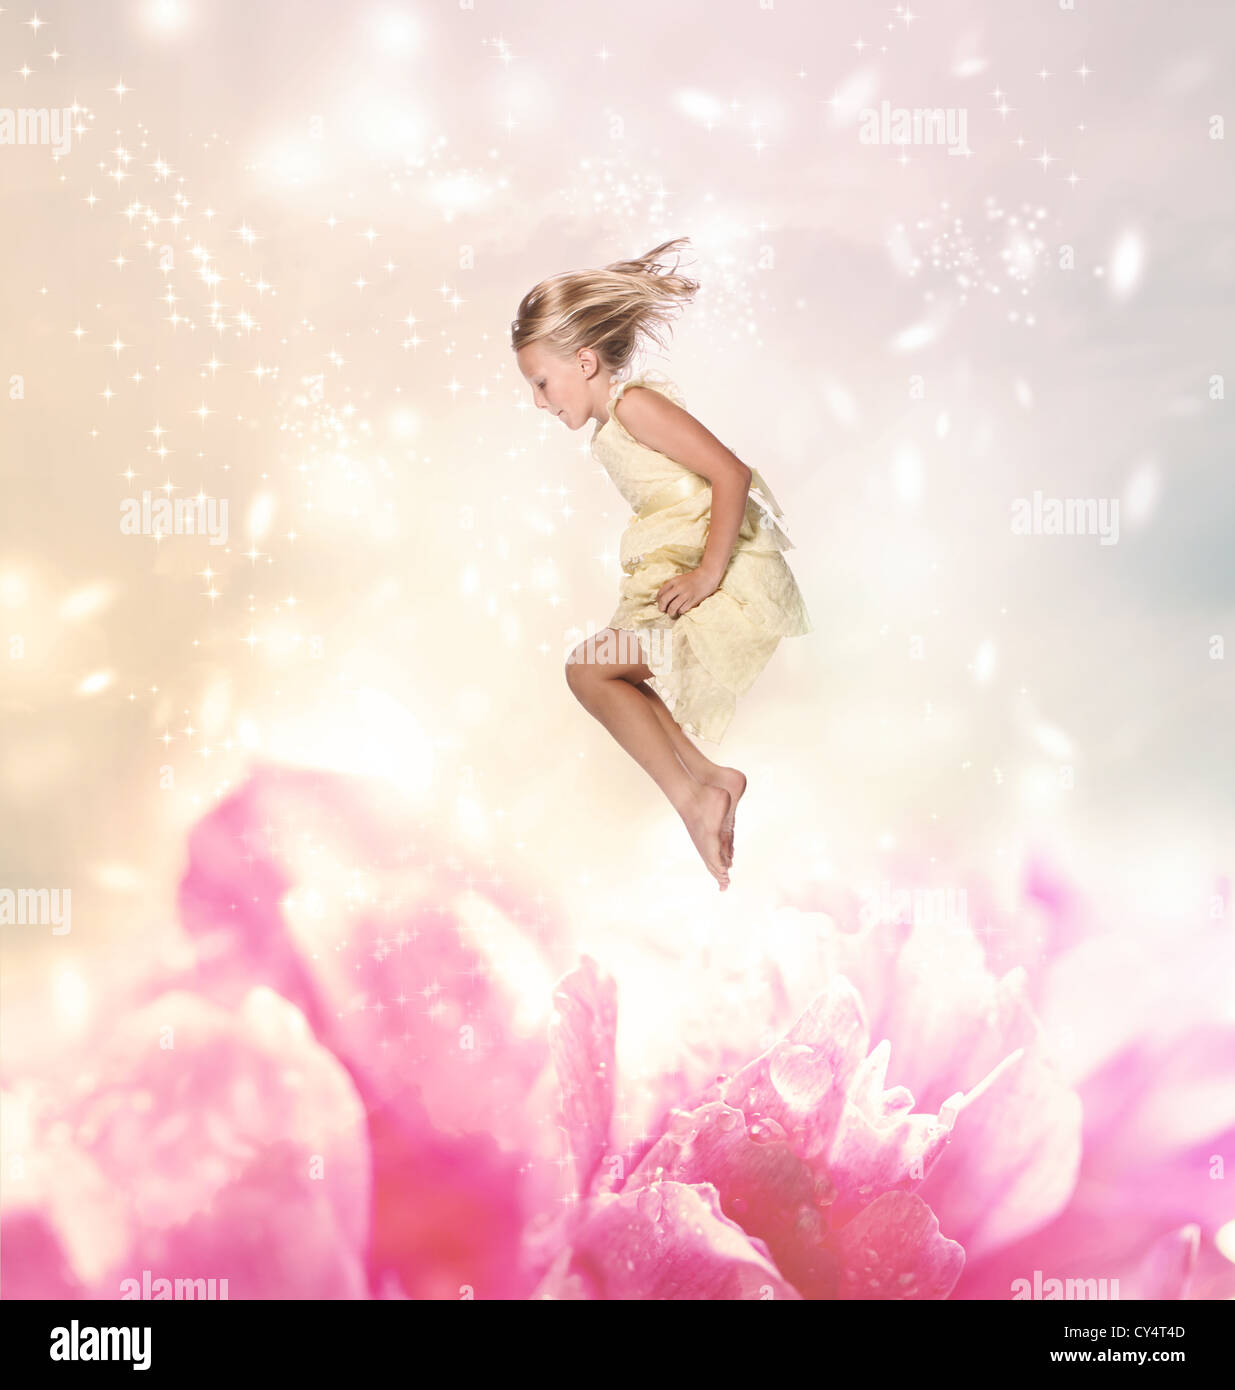 Blond Girl Jumping into a Giant Flower Stock Photo